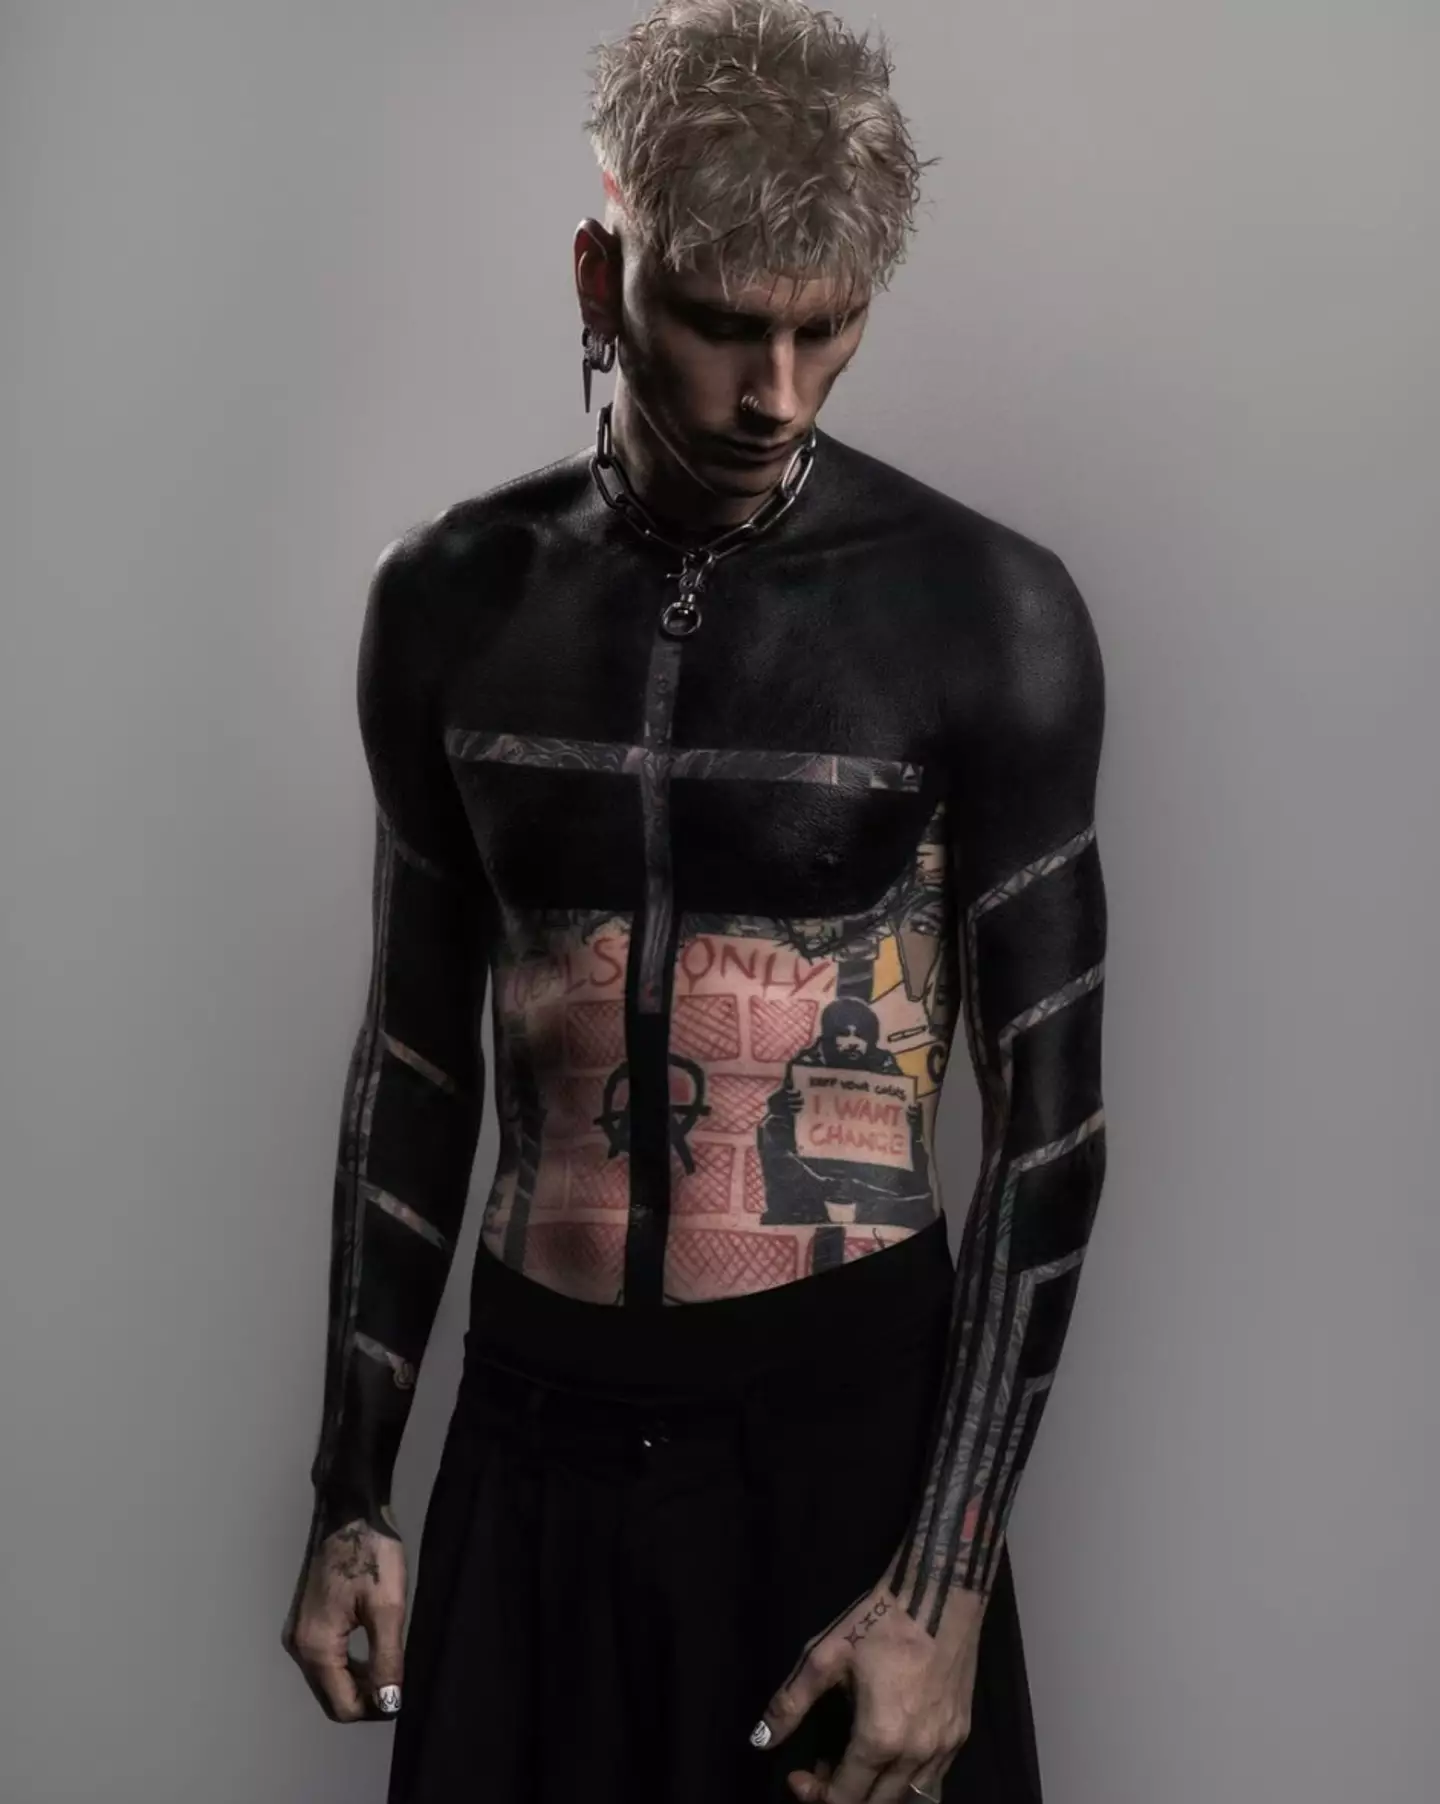 The rapper has a new extreme look. Credit:instagram/machinegunkelly